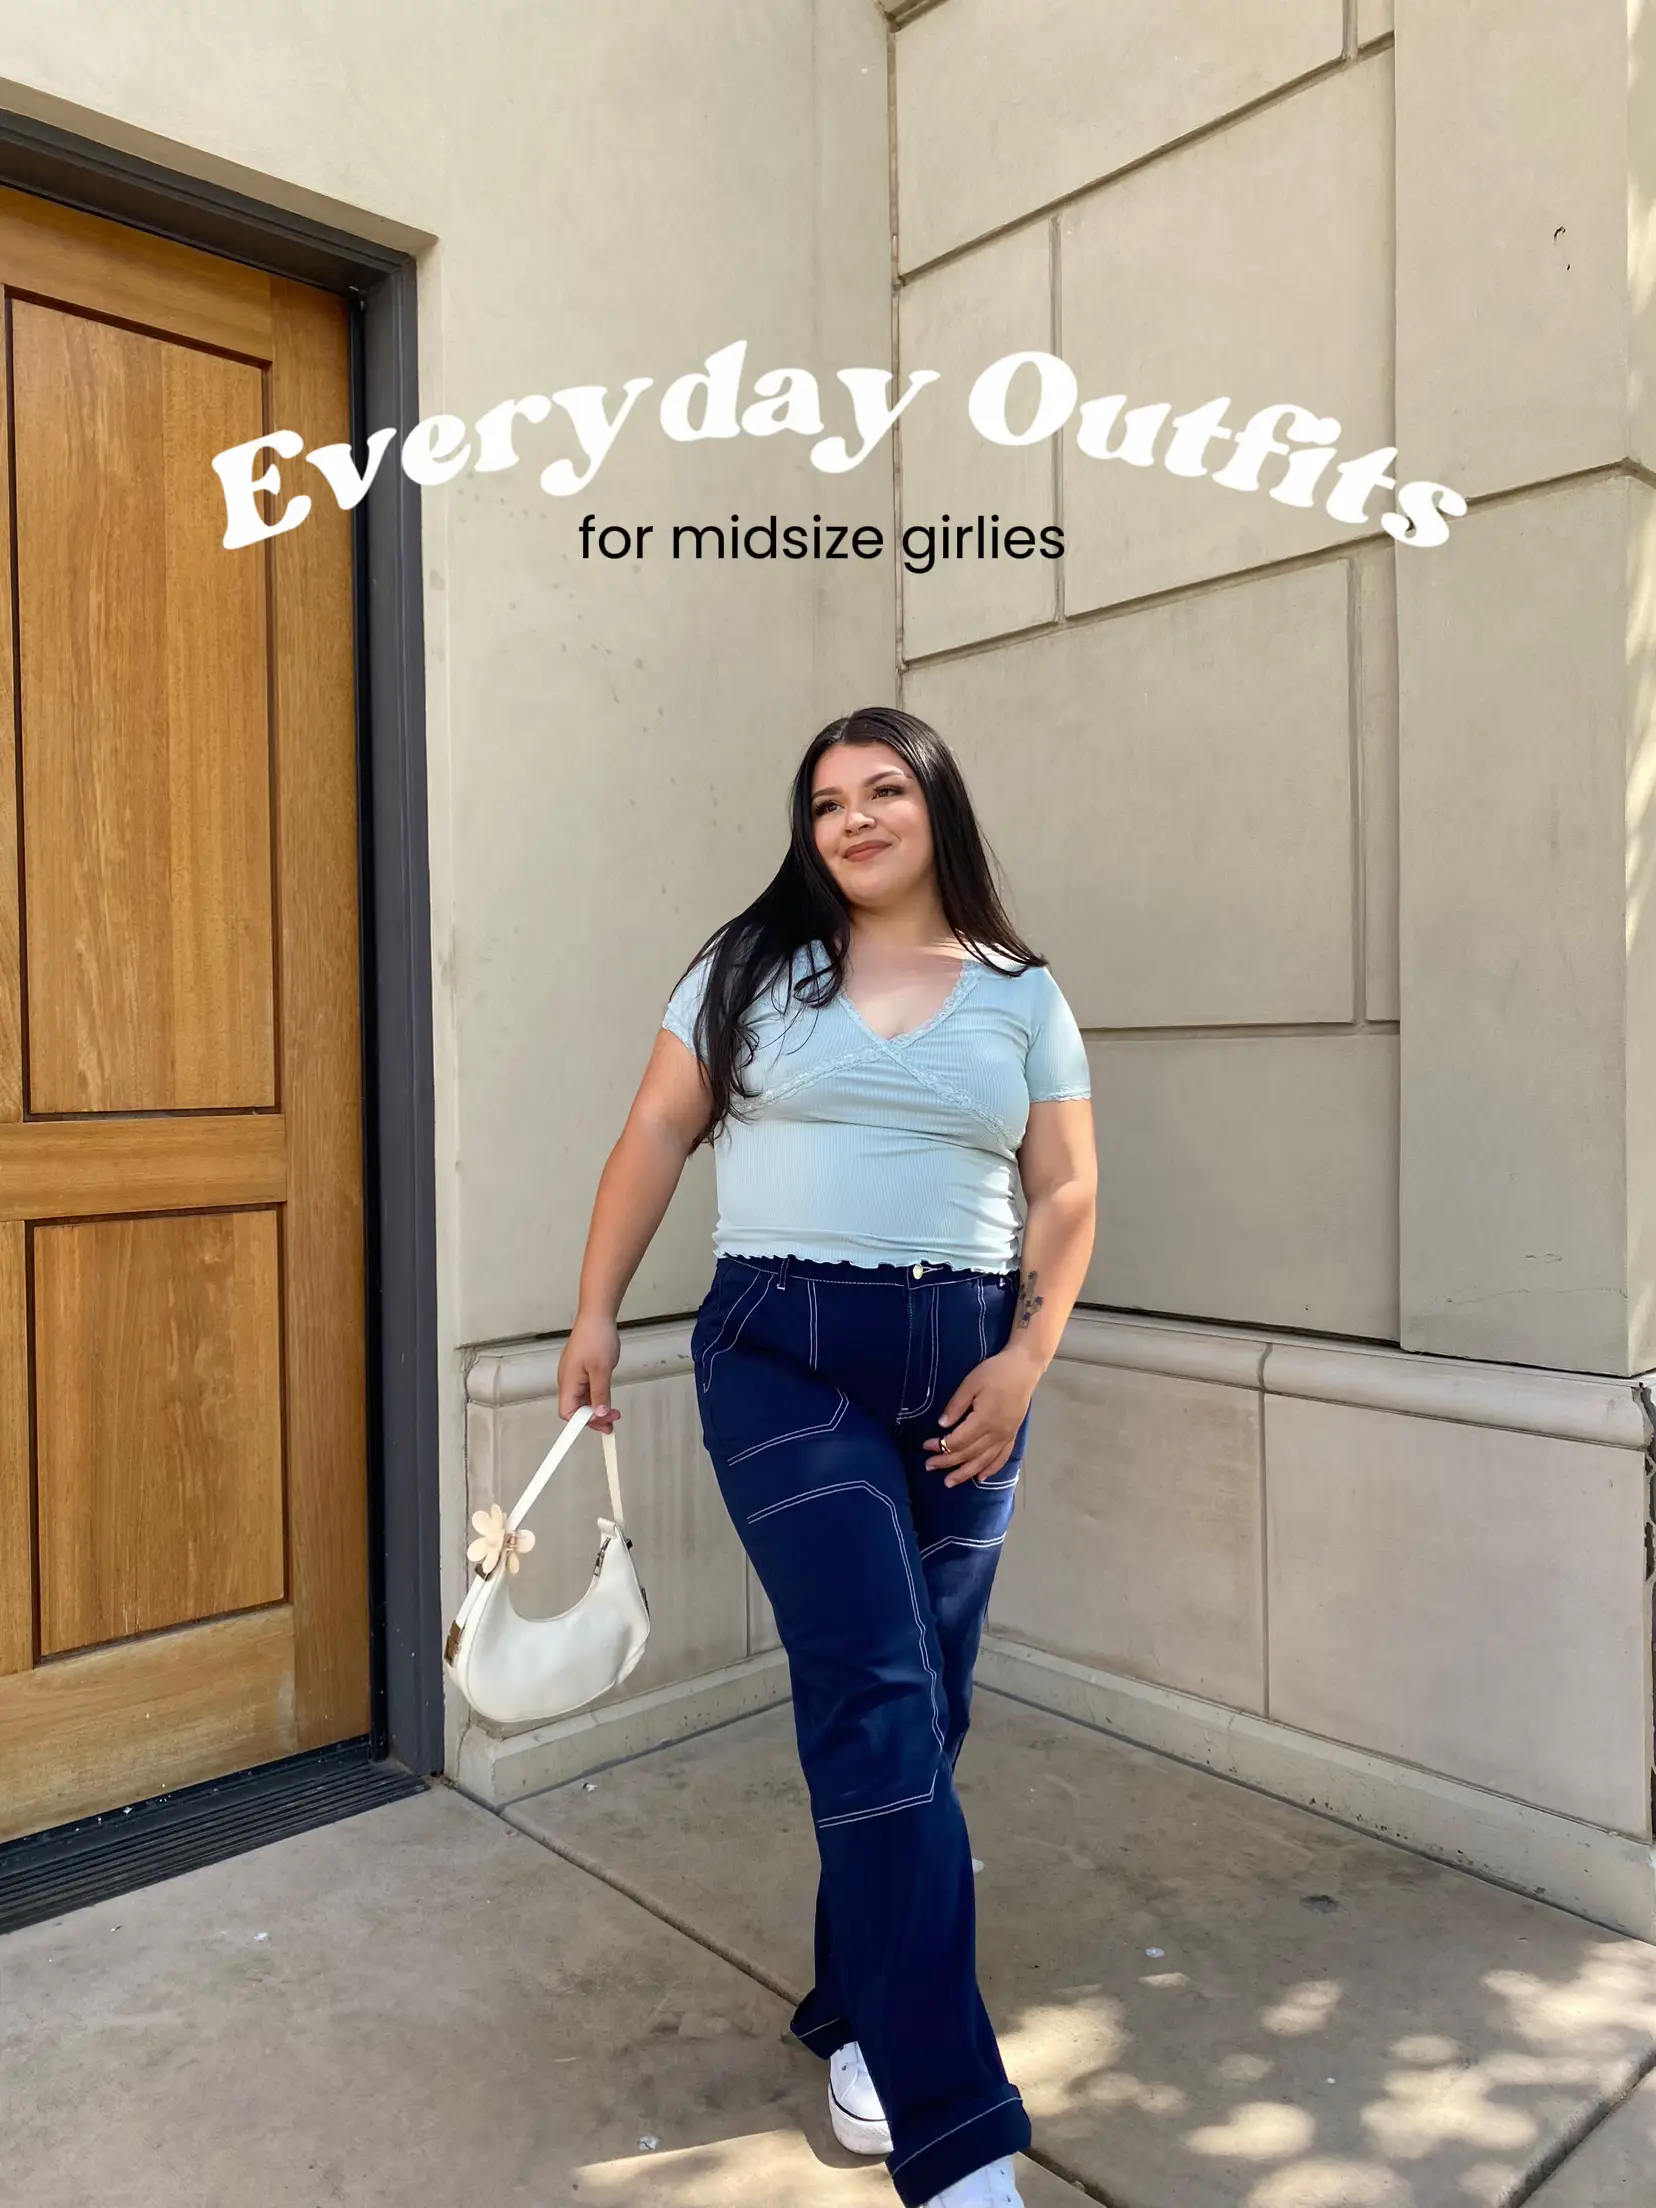 Everyday Outfits for midsize girlies 🫶🏼, Gallery posted by Brenda  Alarcon